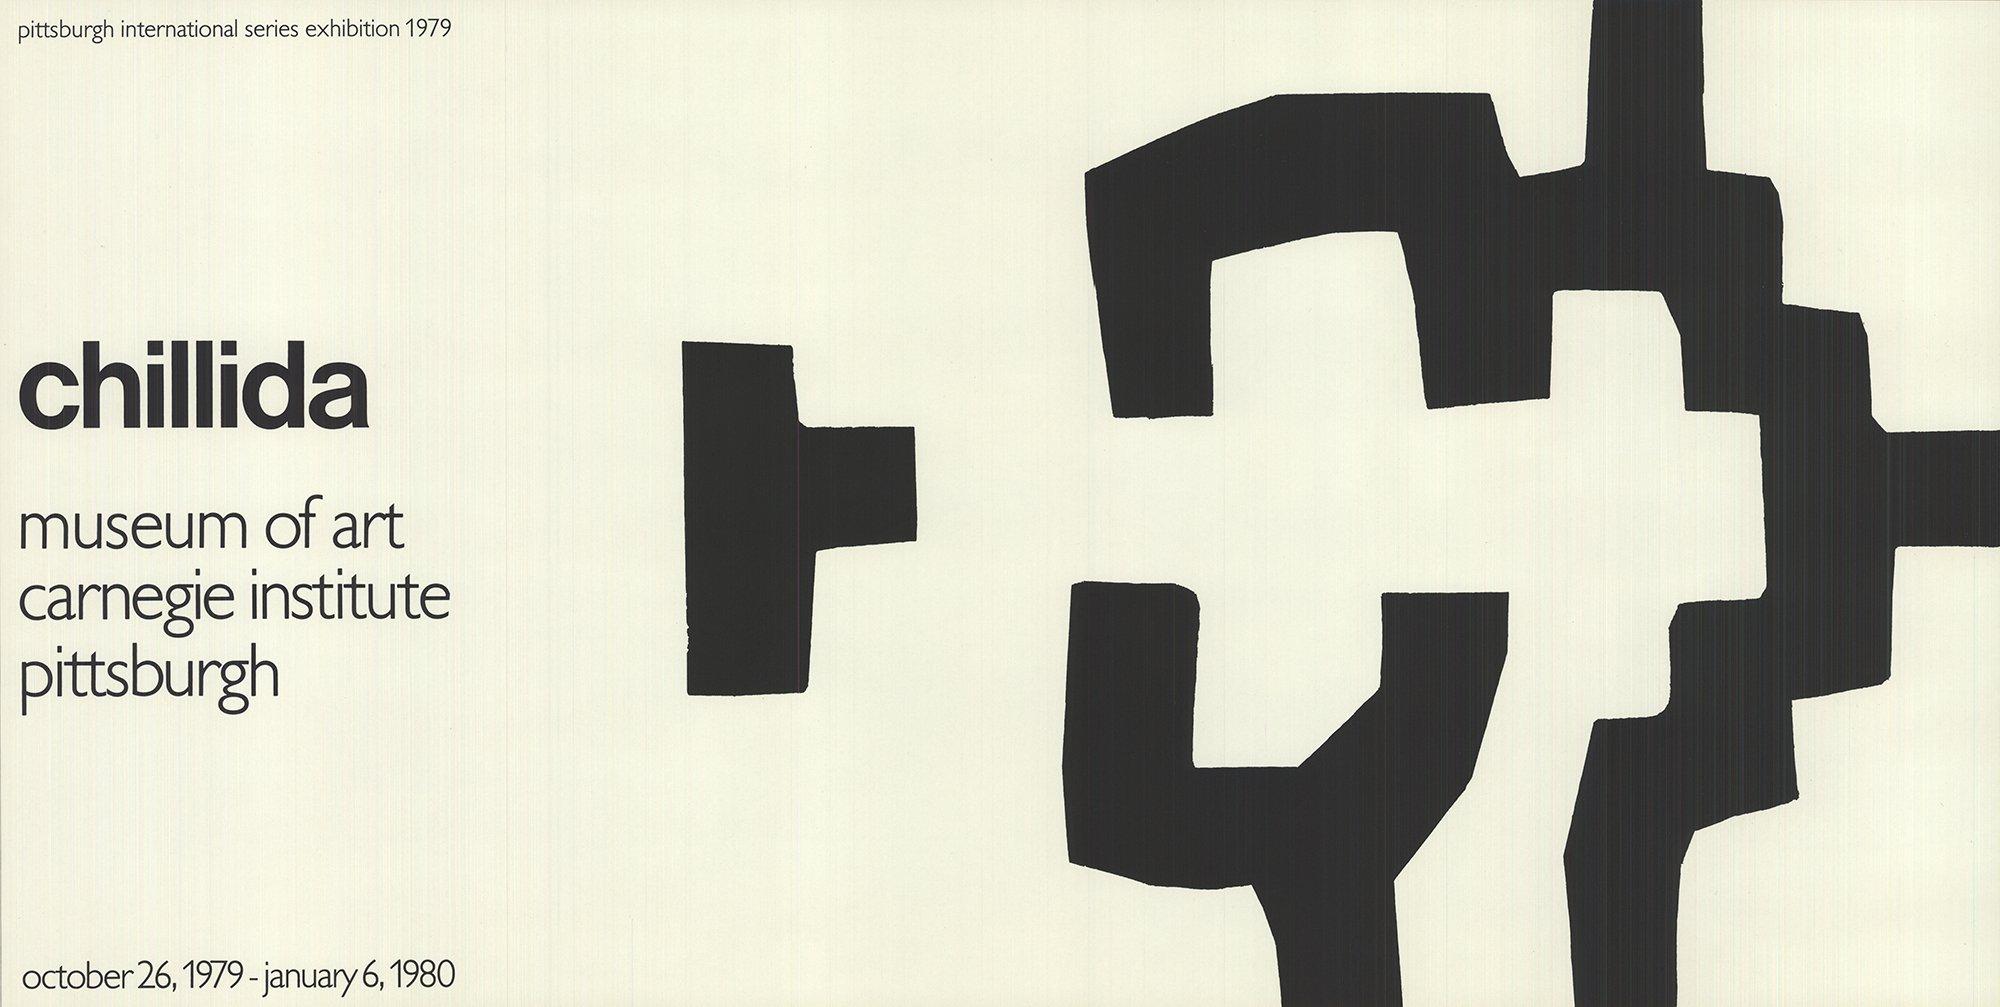 Paper Size: 13 x 25.5 inches ( 33.02 x 64.77 cm )
 Image Size: 13 x 25.5 inches ( 33.02 x 64.77 cm )
 Framed: No
 Condition: A-: Near Mint, very light signs of handling
 
 Additional Details: Poster for a Chillida exhibit at the Museum of Art